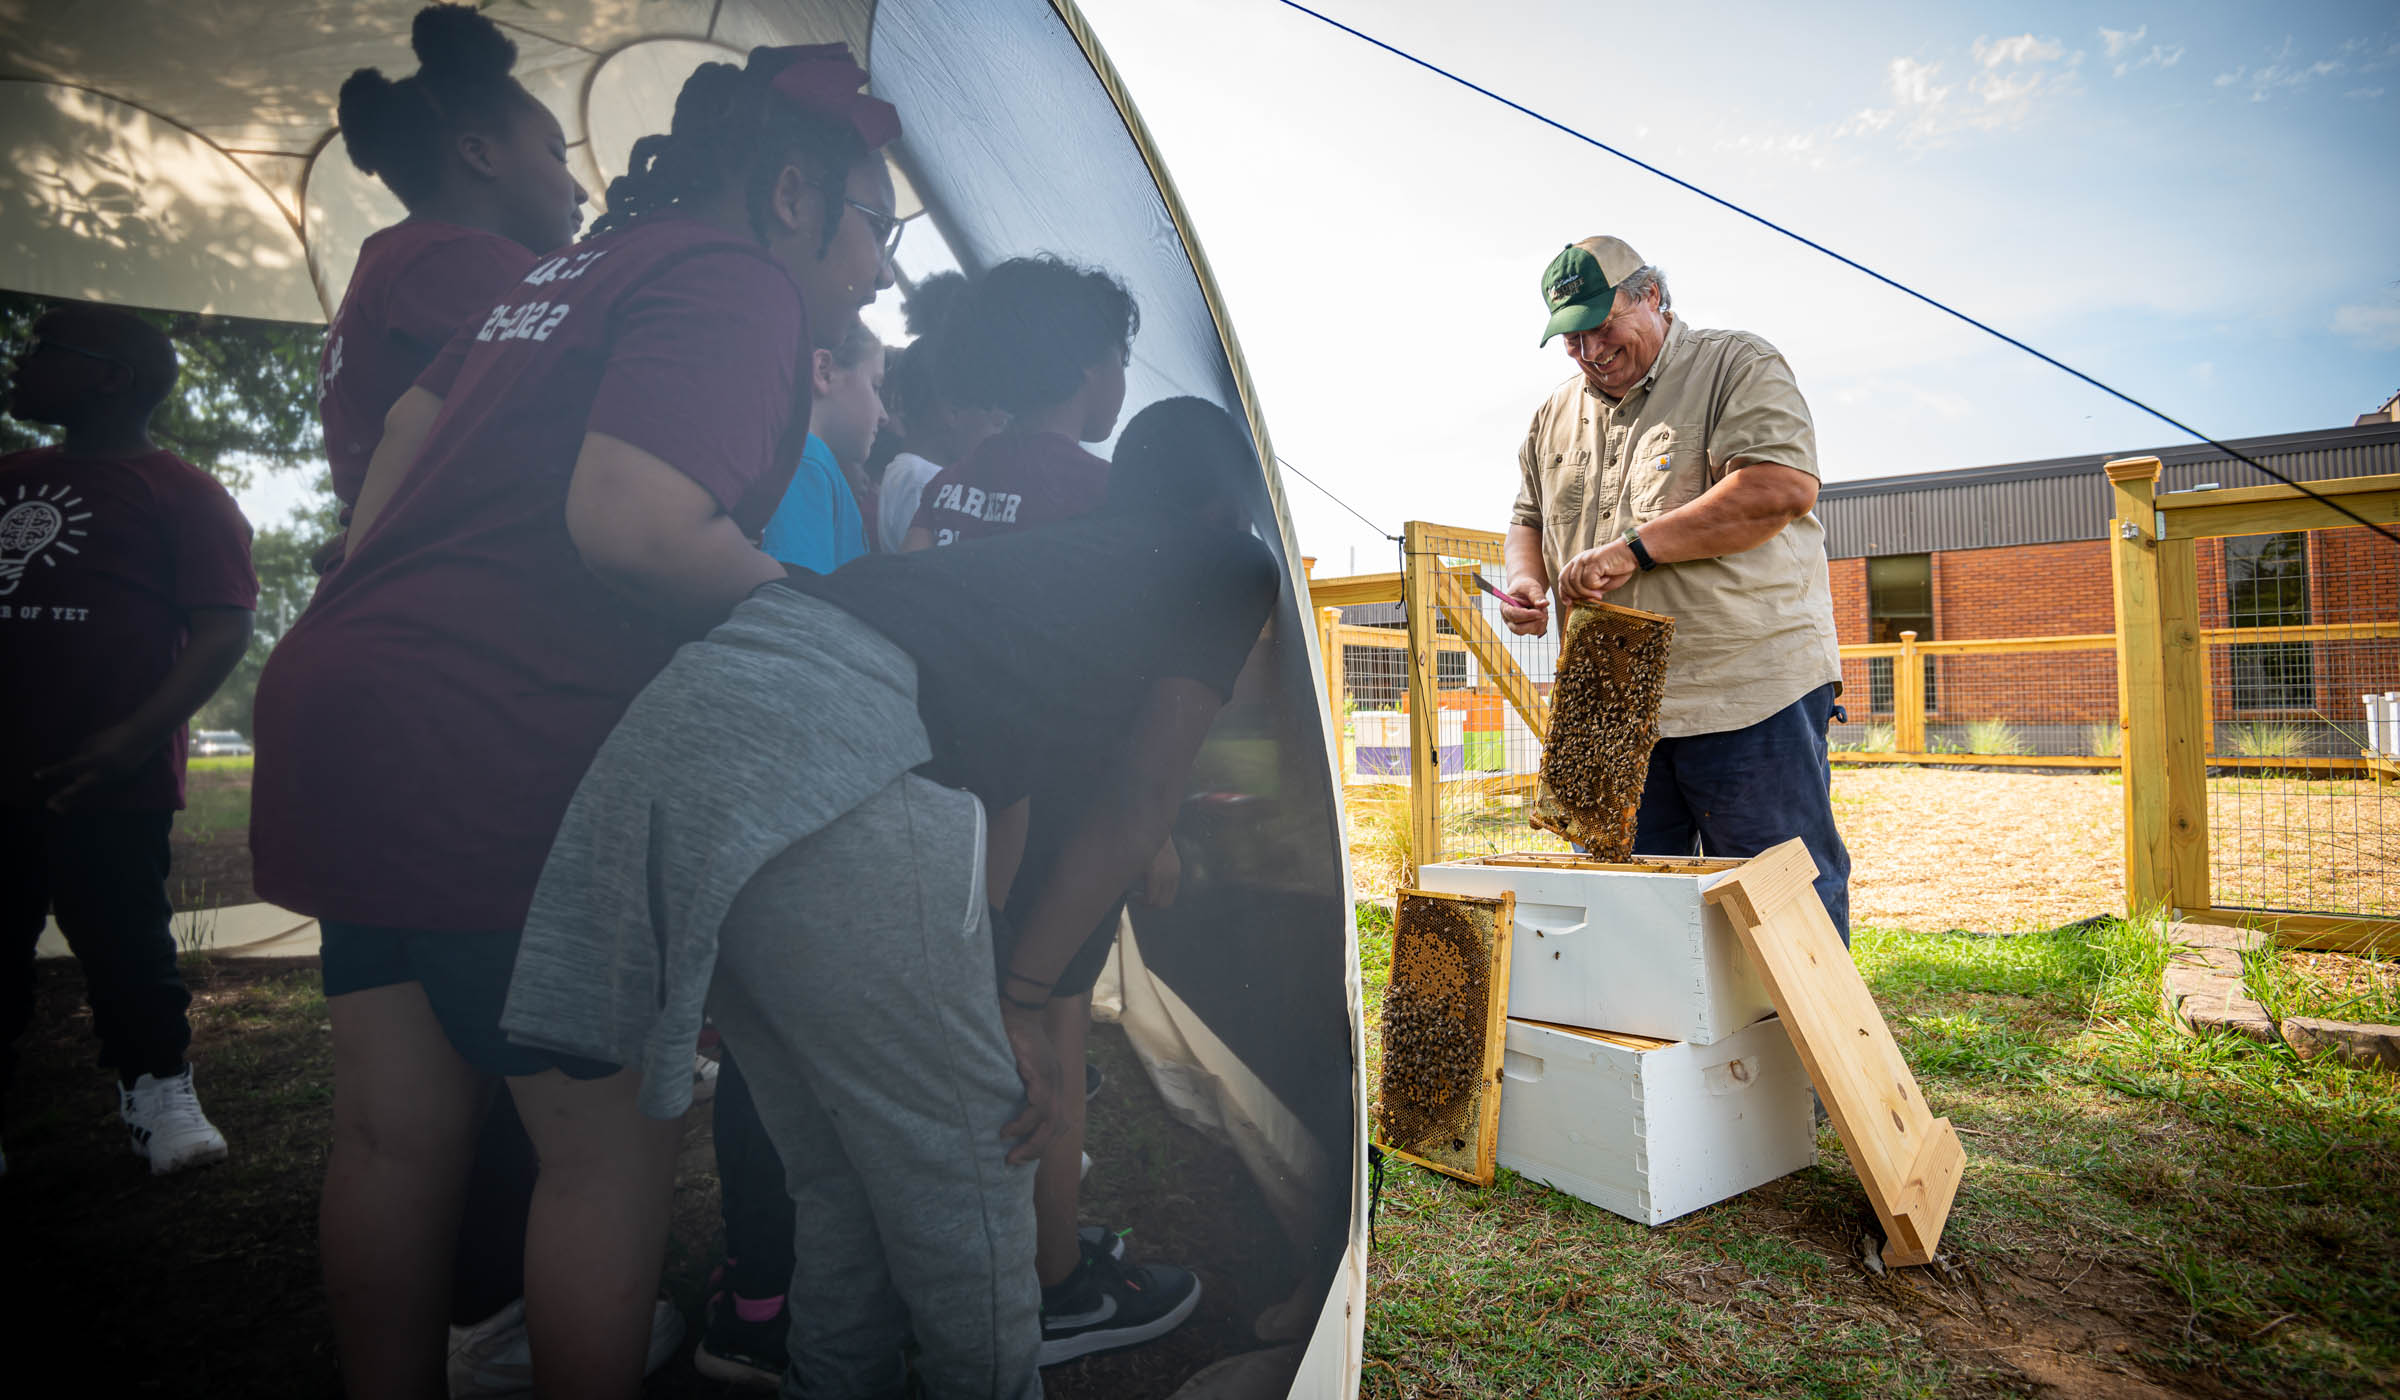 On the left side of the frame, elementary students are encased in a rounded screened tent while Jeff Harris holds up bees from a hive outside.